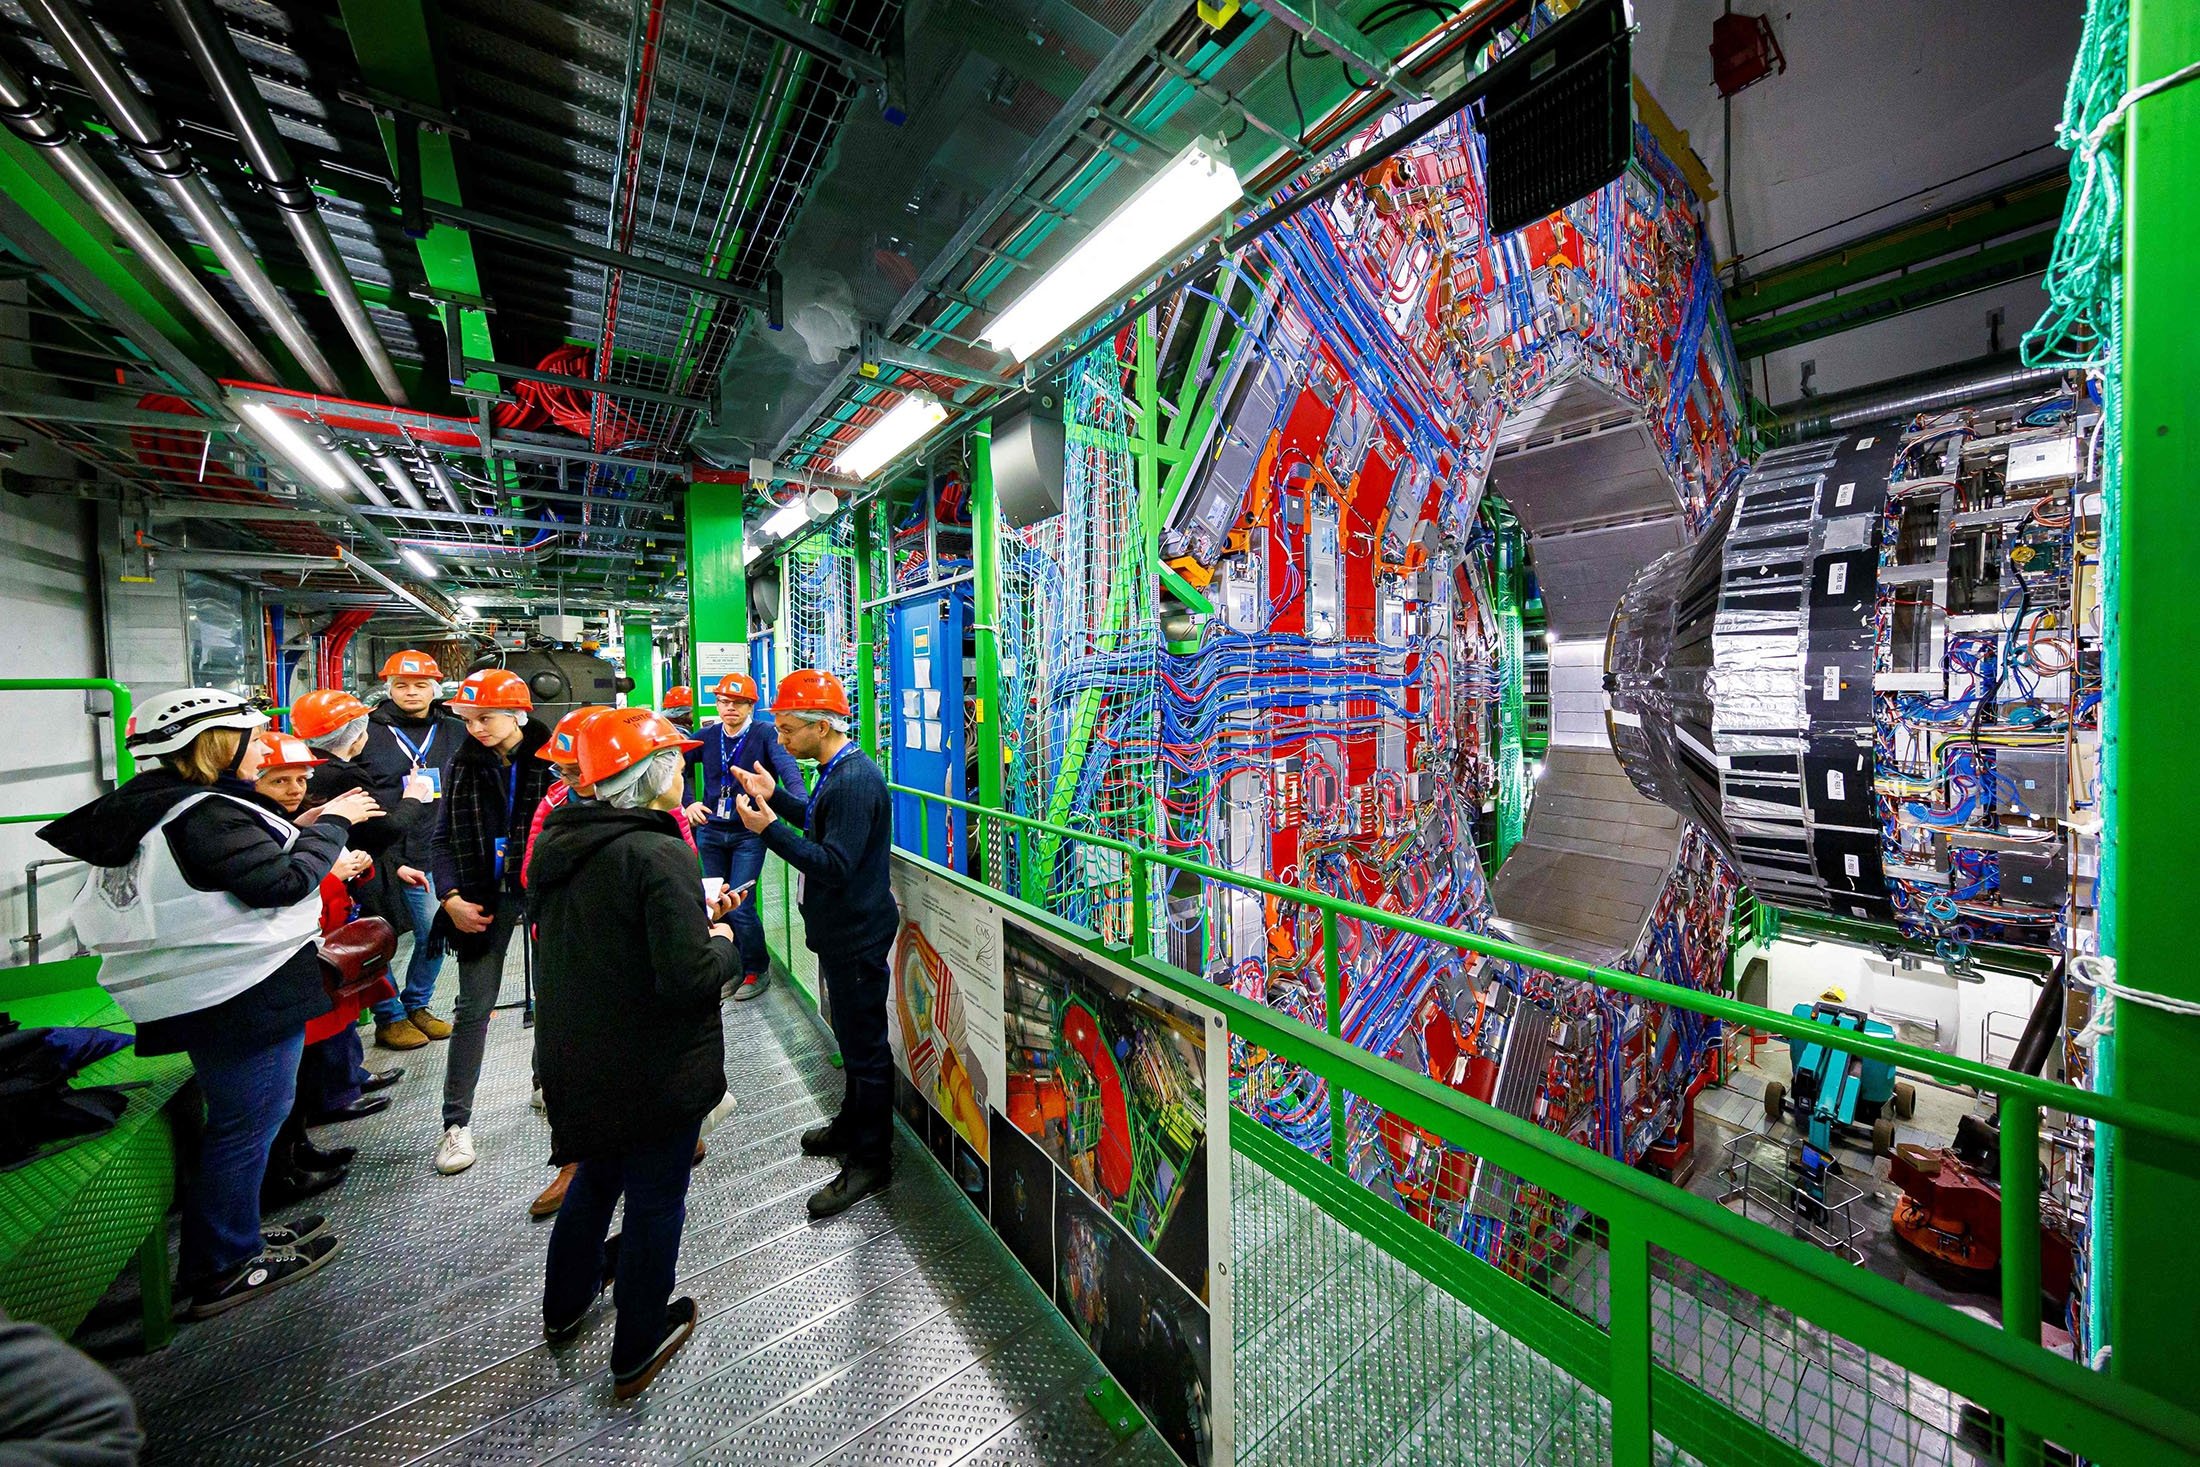 Members of the media receive explanations next to the Compact Muon Solenoid detector assembly in a tunnel of the Large Hadron Collider at CERN, during maintenance works in Cessy, France, near Geneva, Feb. 6, 2020. (AFP Photo)